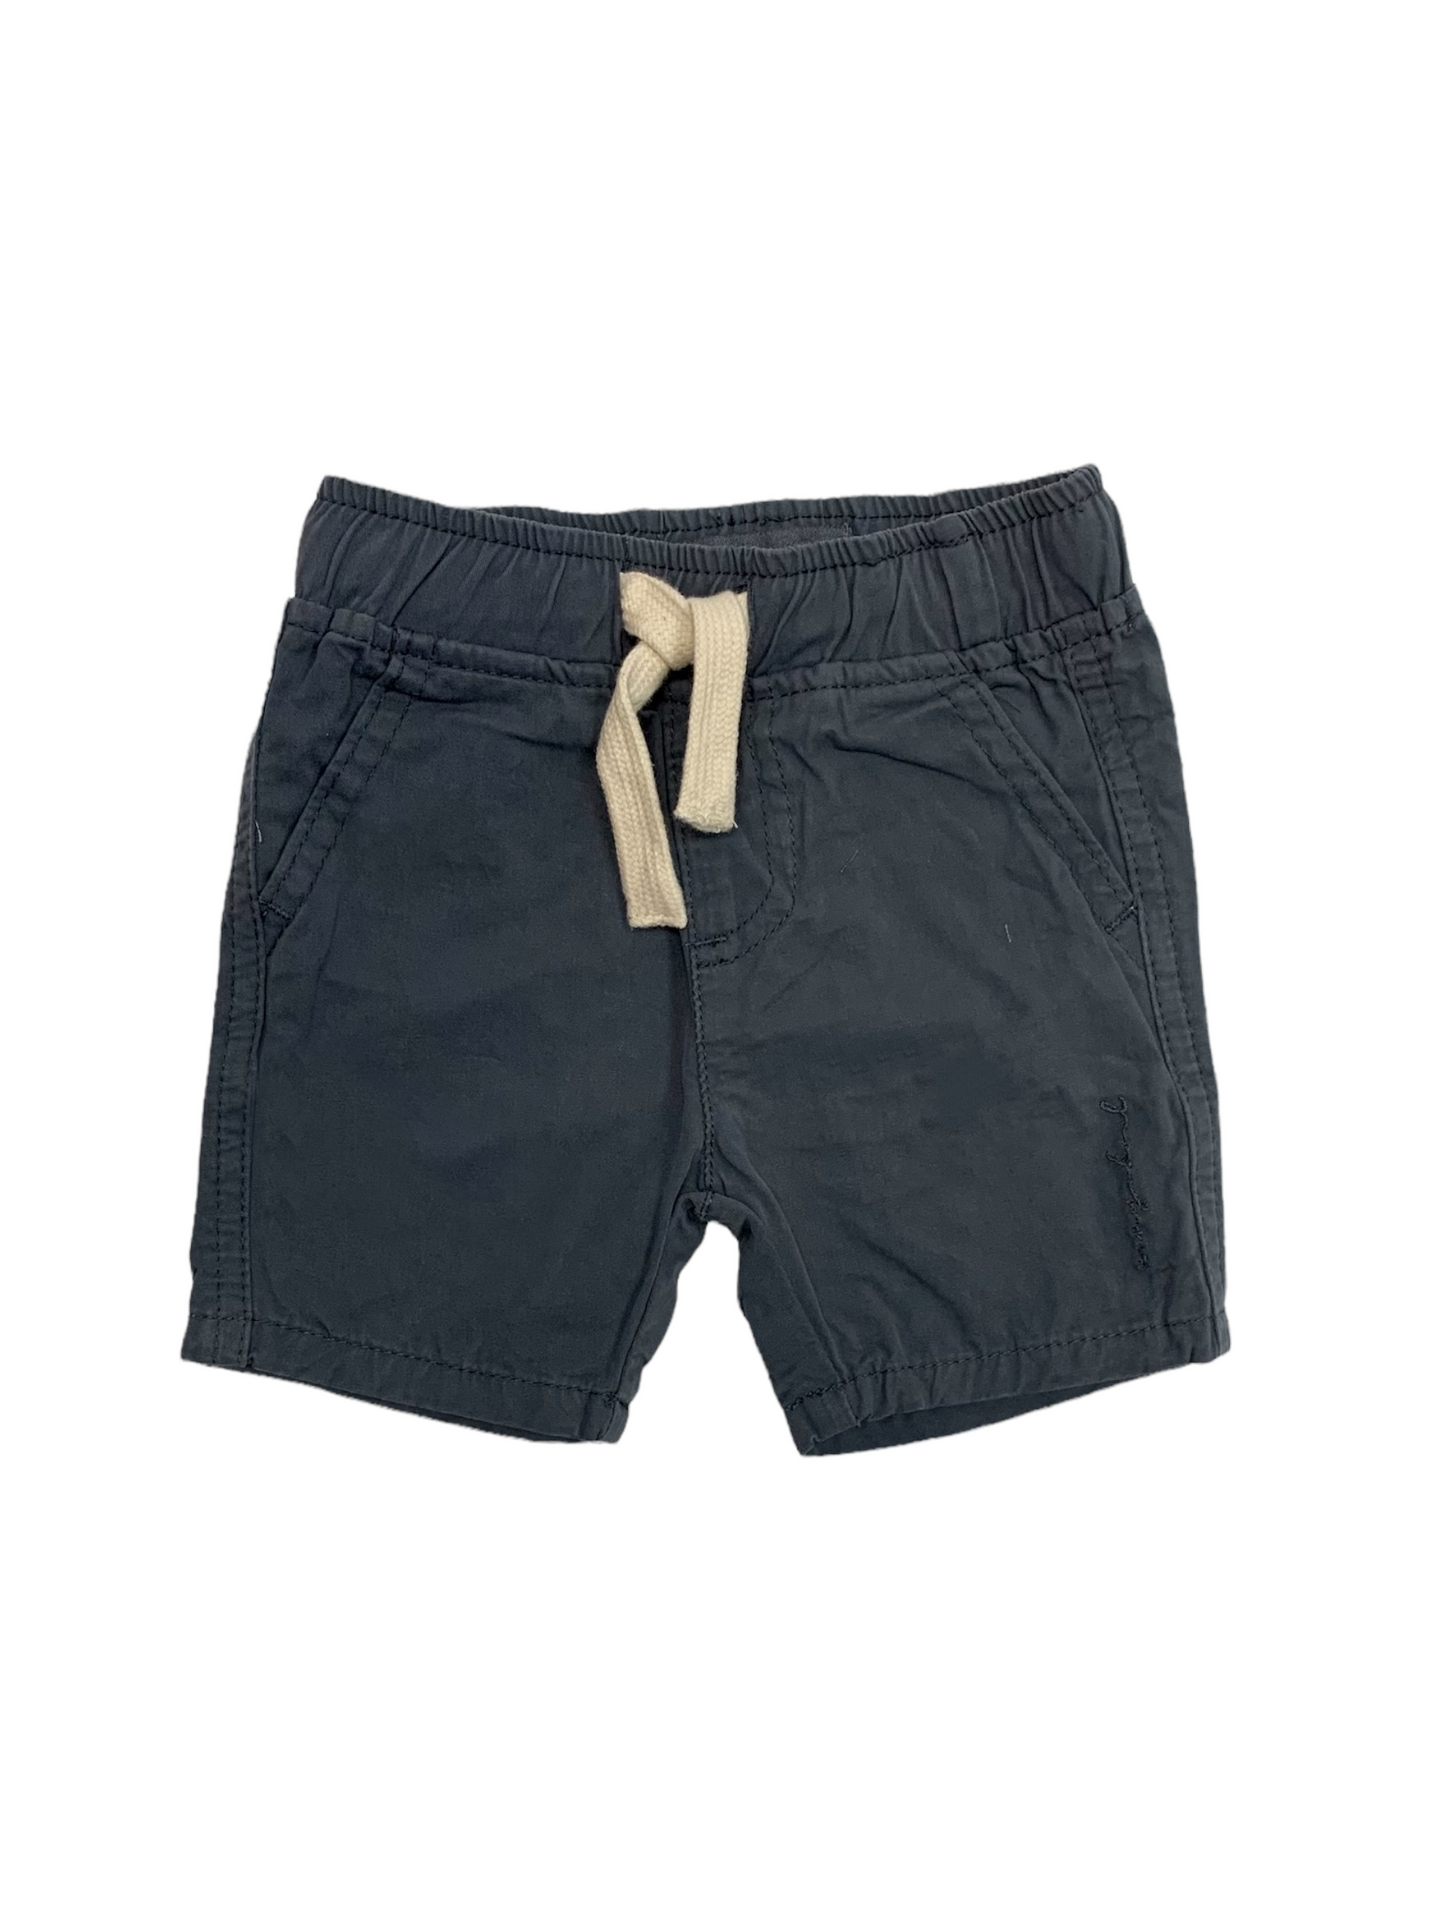 Gray Romy&Aksel Bermuda shorts for boys 2 to 8 years